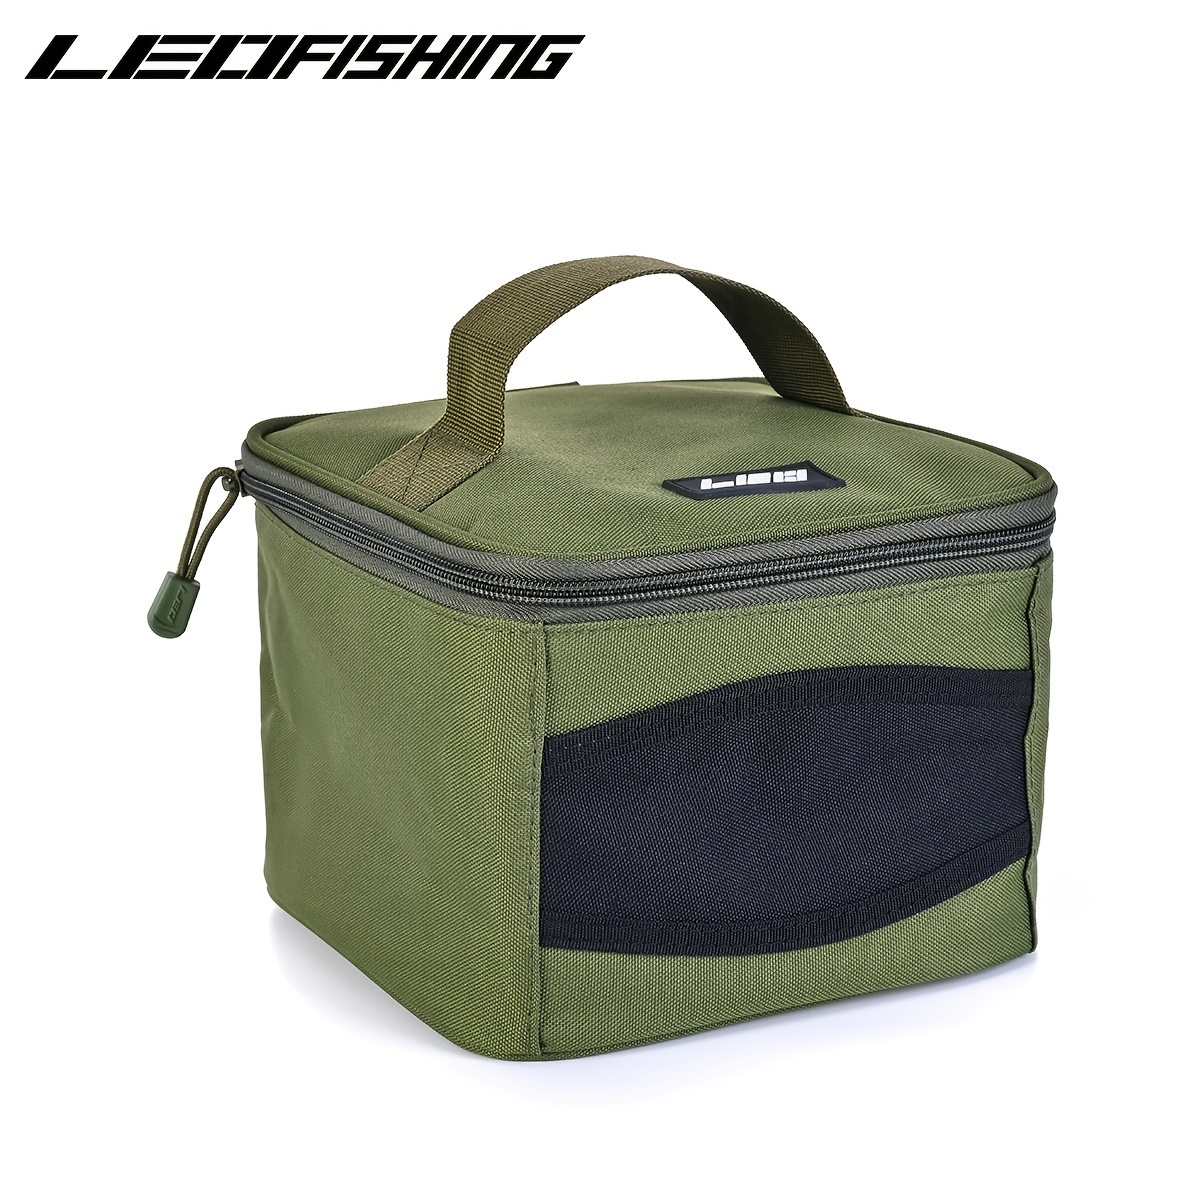 SMALL)FISHING REEL CASE Reel Cases Cover Pouch Storage Box Hard Fishing Reel  $21.41 - PicClick AU